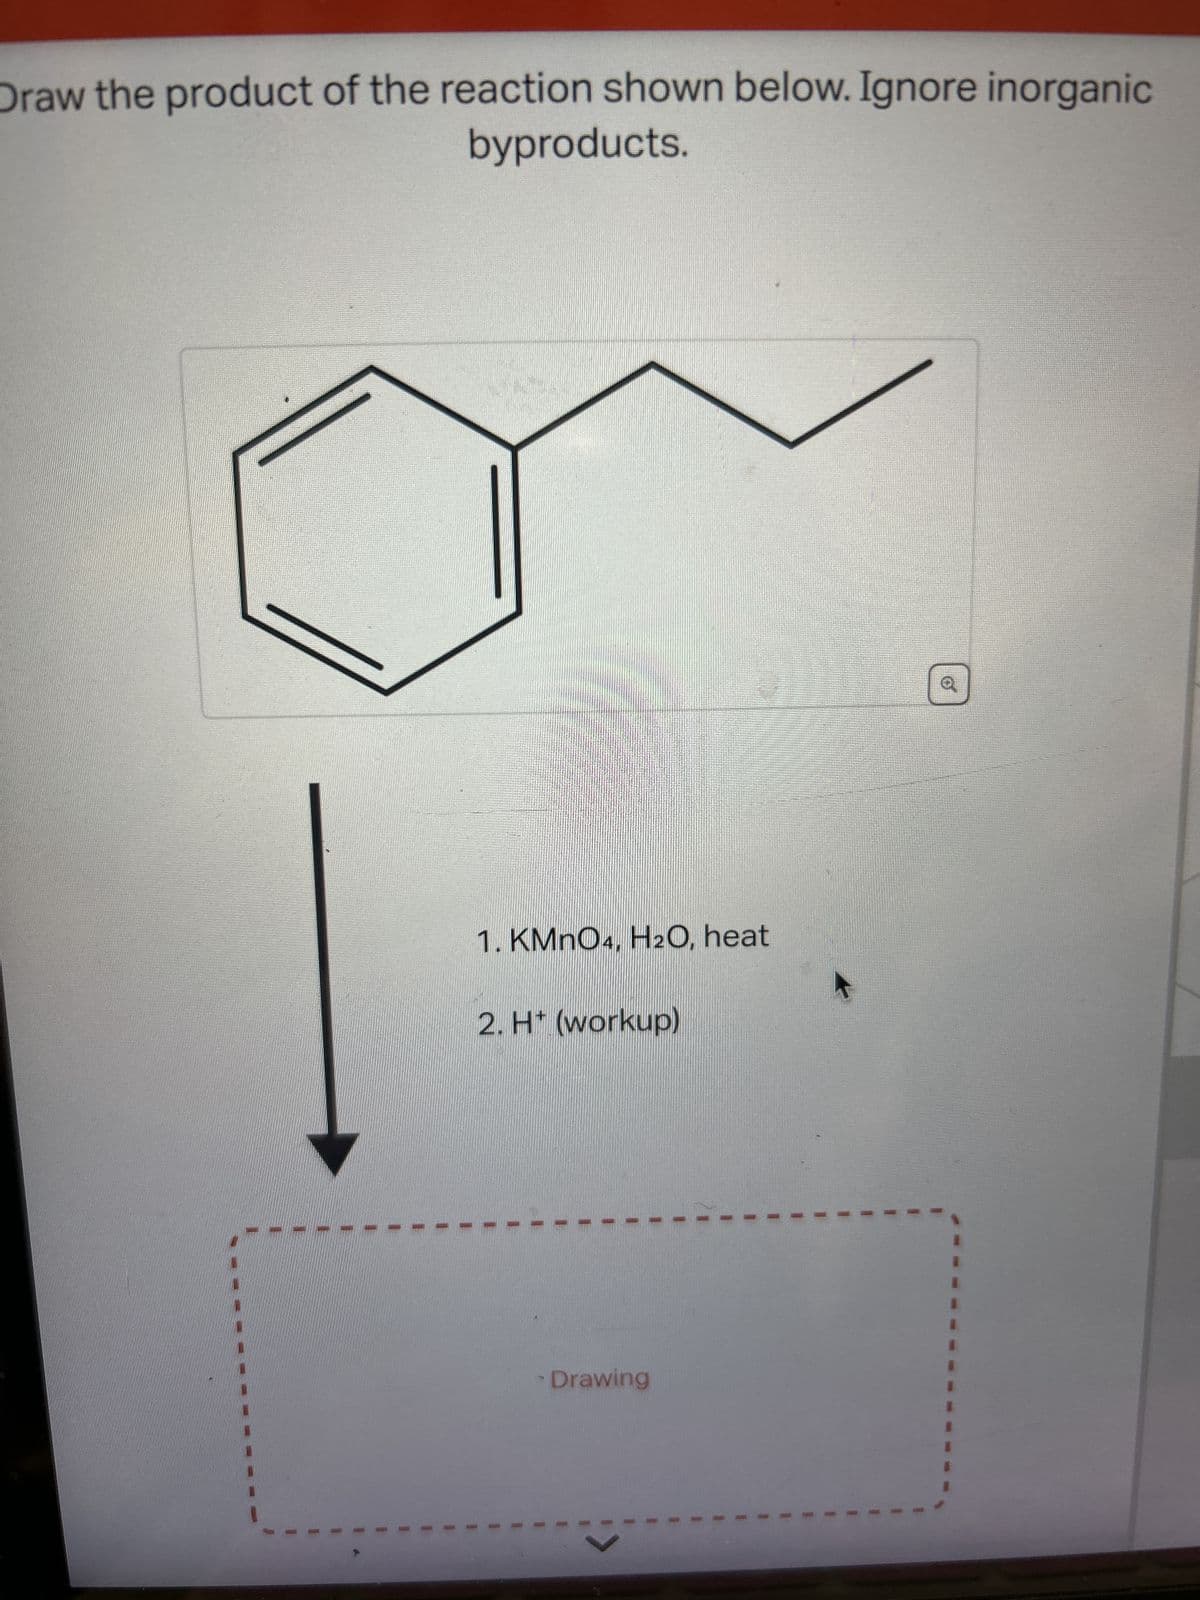 Draw the product of the reaction shown below. Ignore inorganic
byproducts.
1
I
1
I
1. KMnO4, H2O, heat
2. H* (workup)
I
I
Drawing
V
I
1
1